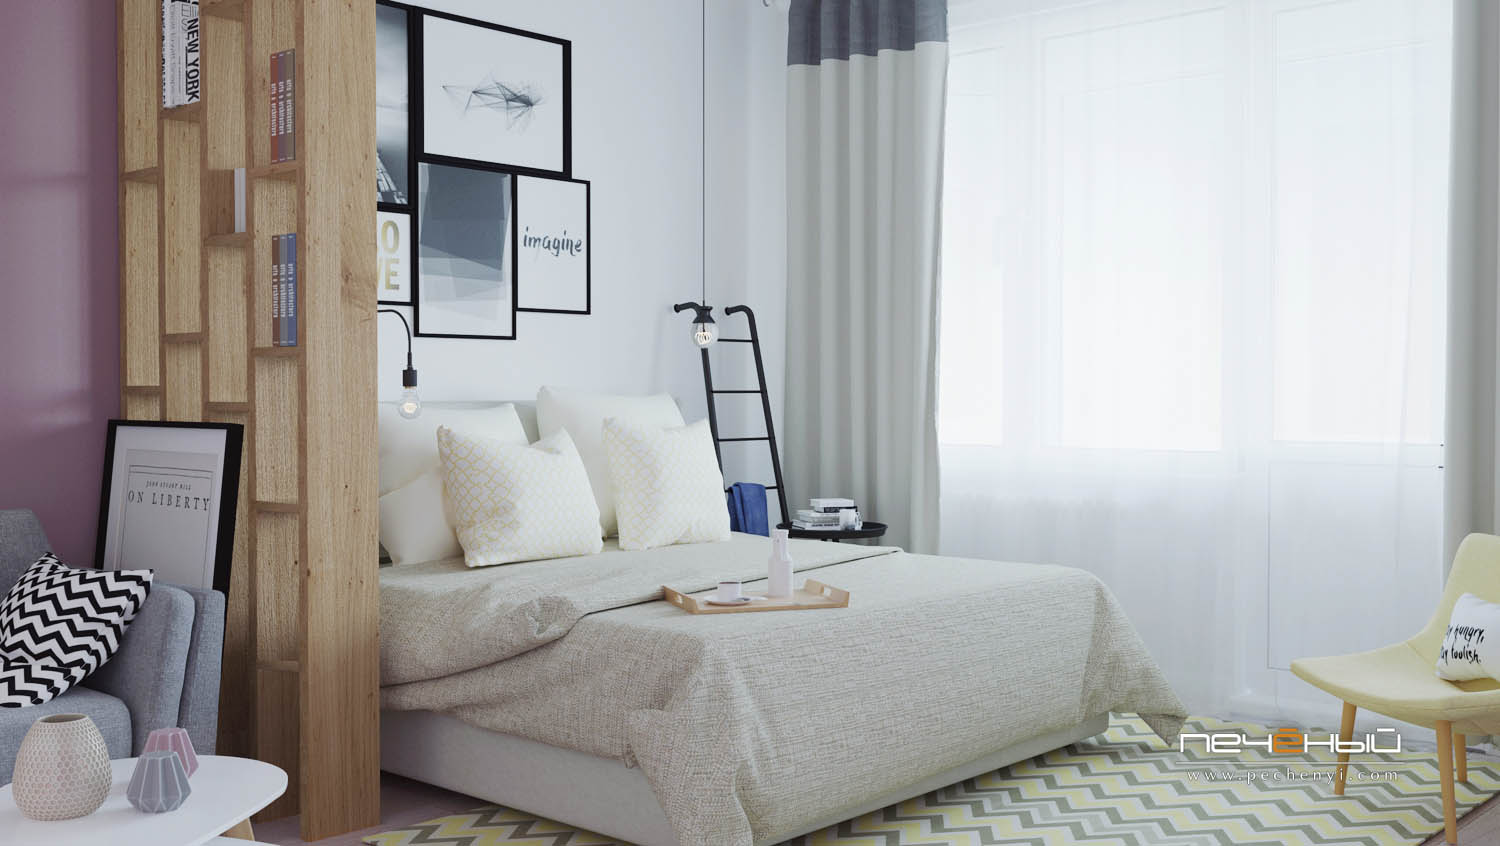 The sleeping space is taken by a large bed, wall sconces, a gallery wall and a ladder shelf for storage